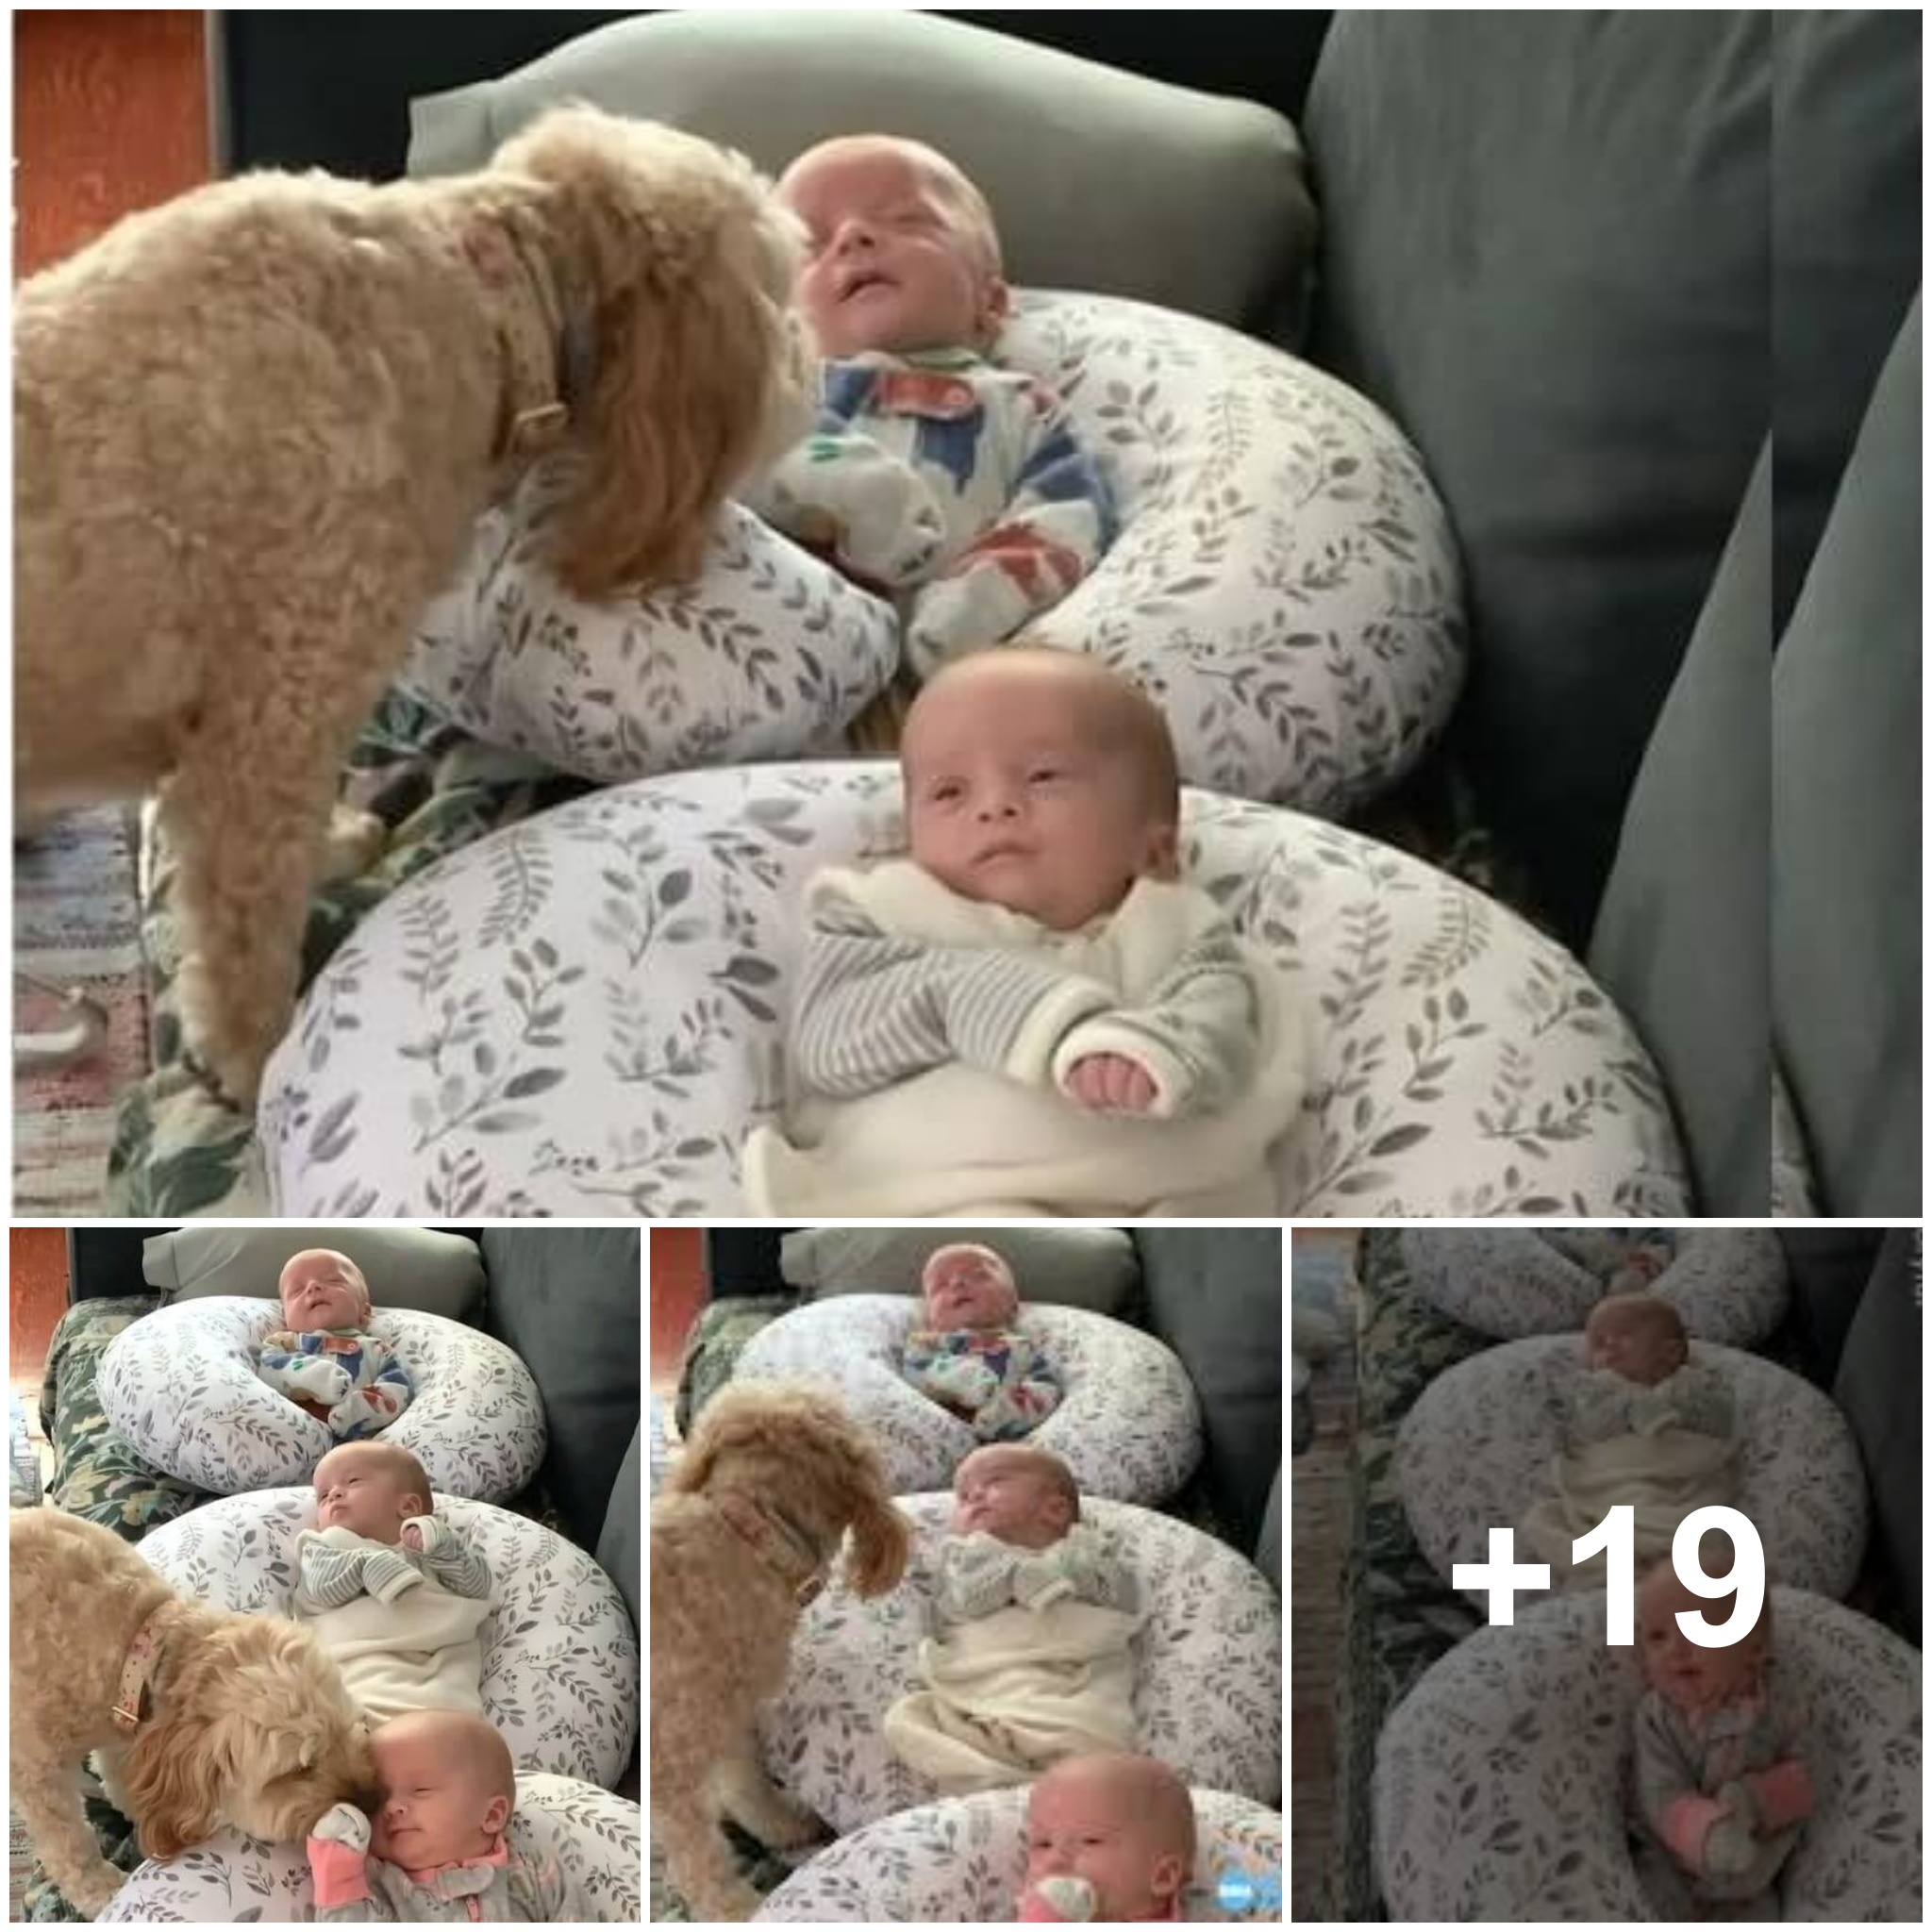 The dog is devoted to his three newborn owners, always by their side to protect their safety, his furry nanny gives their parents peace of mind.